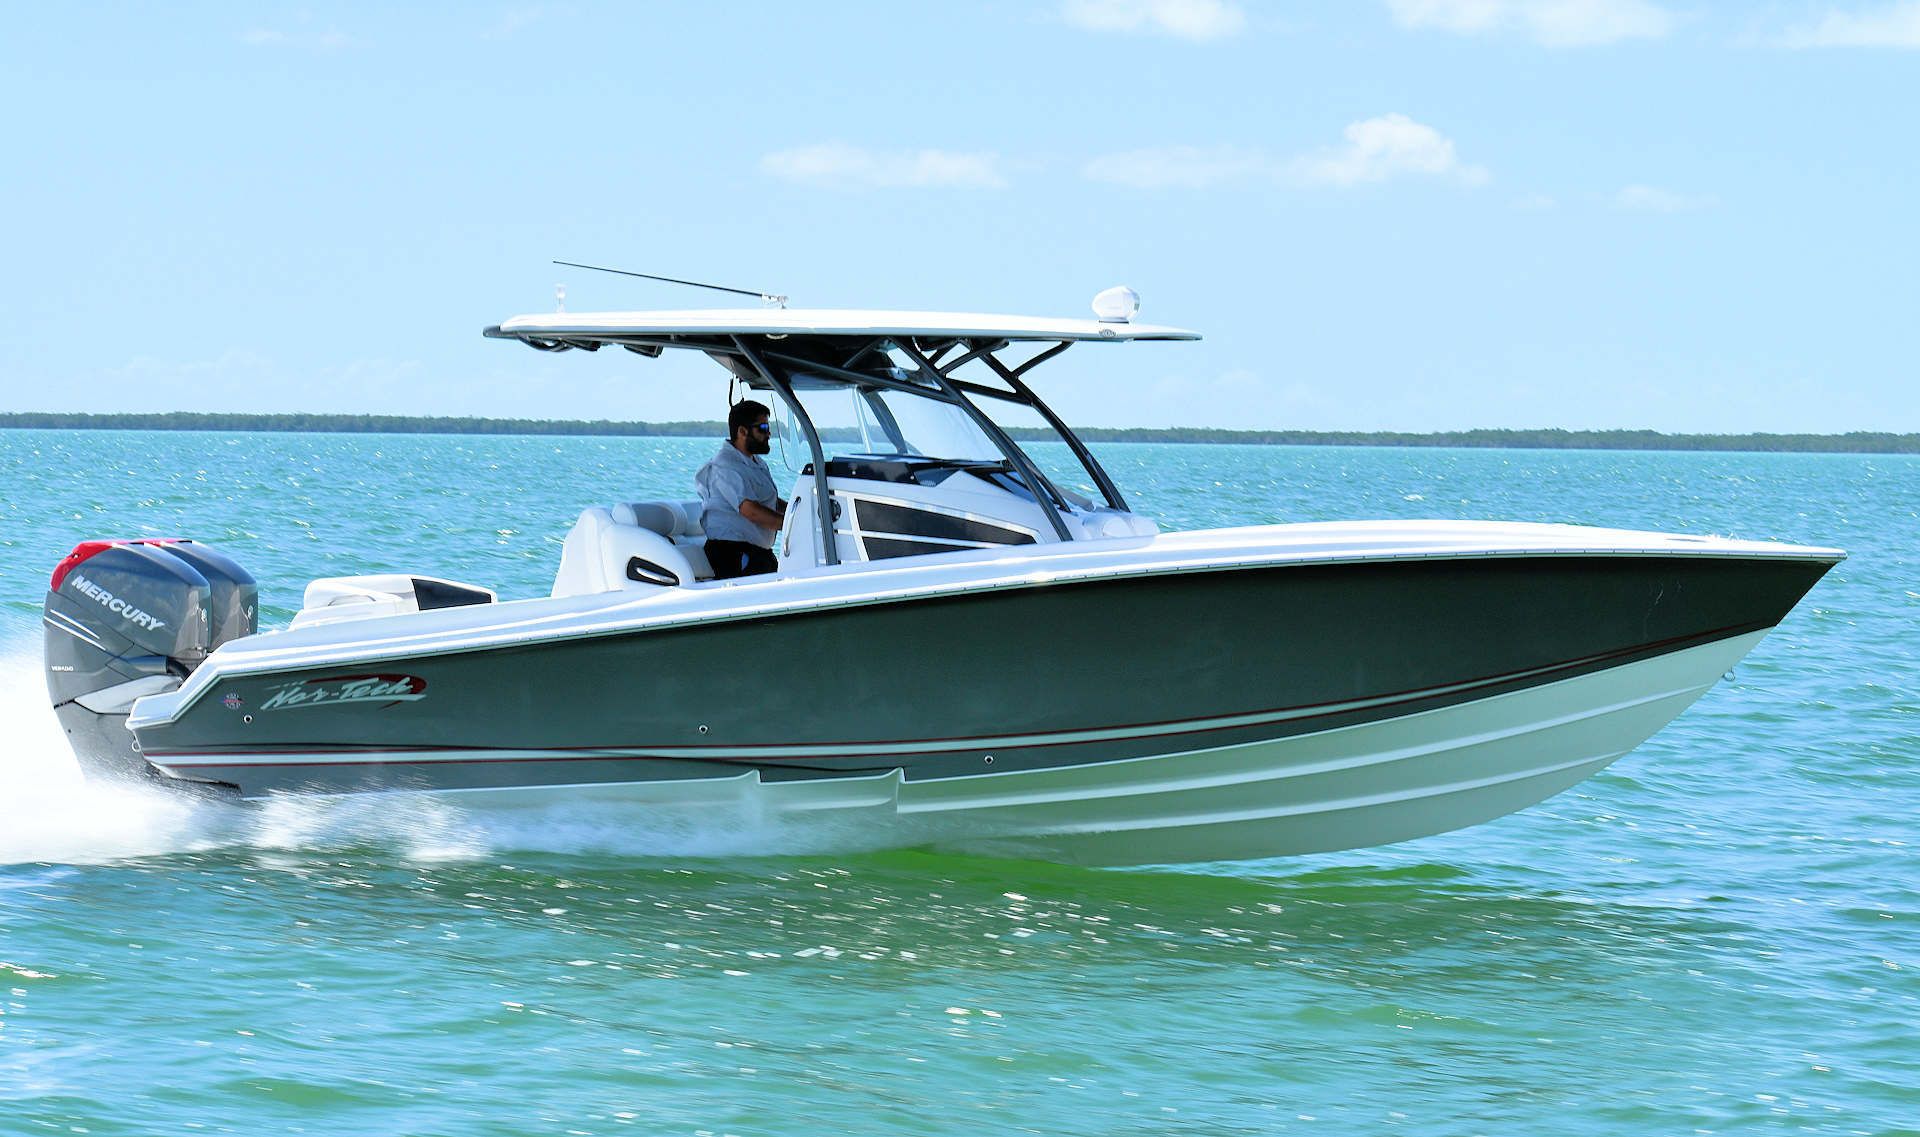 This Nor-Tech was SOLD by Boat Depot in Key Largo, FL